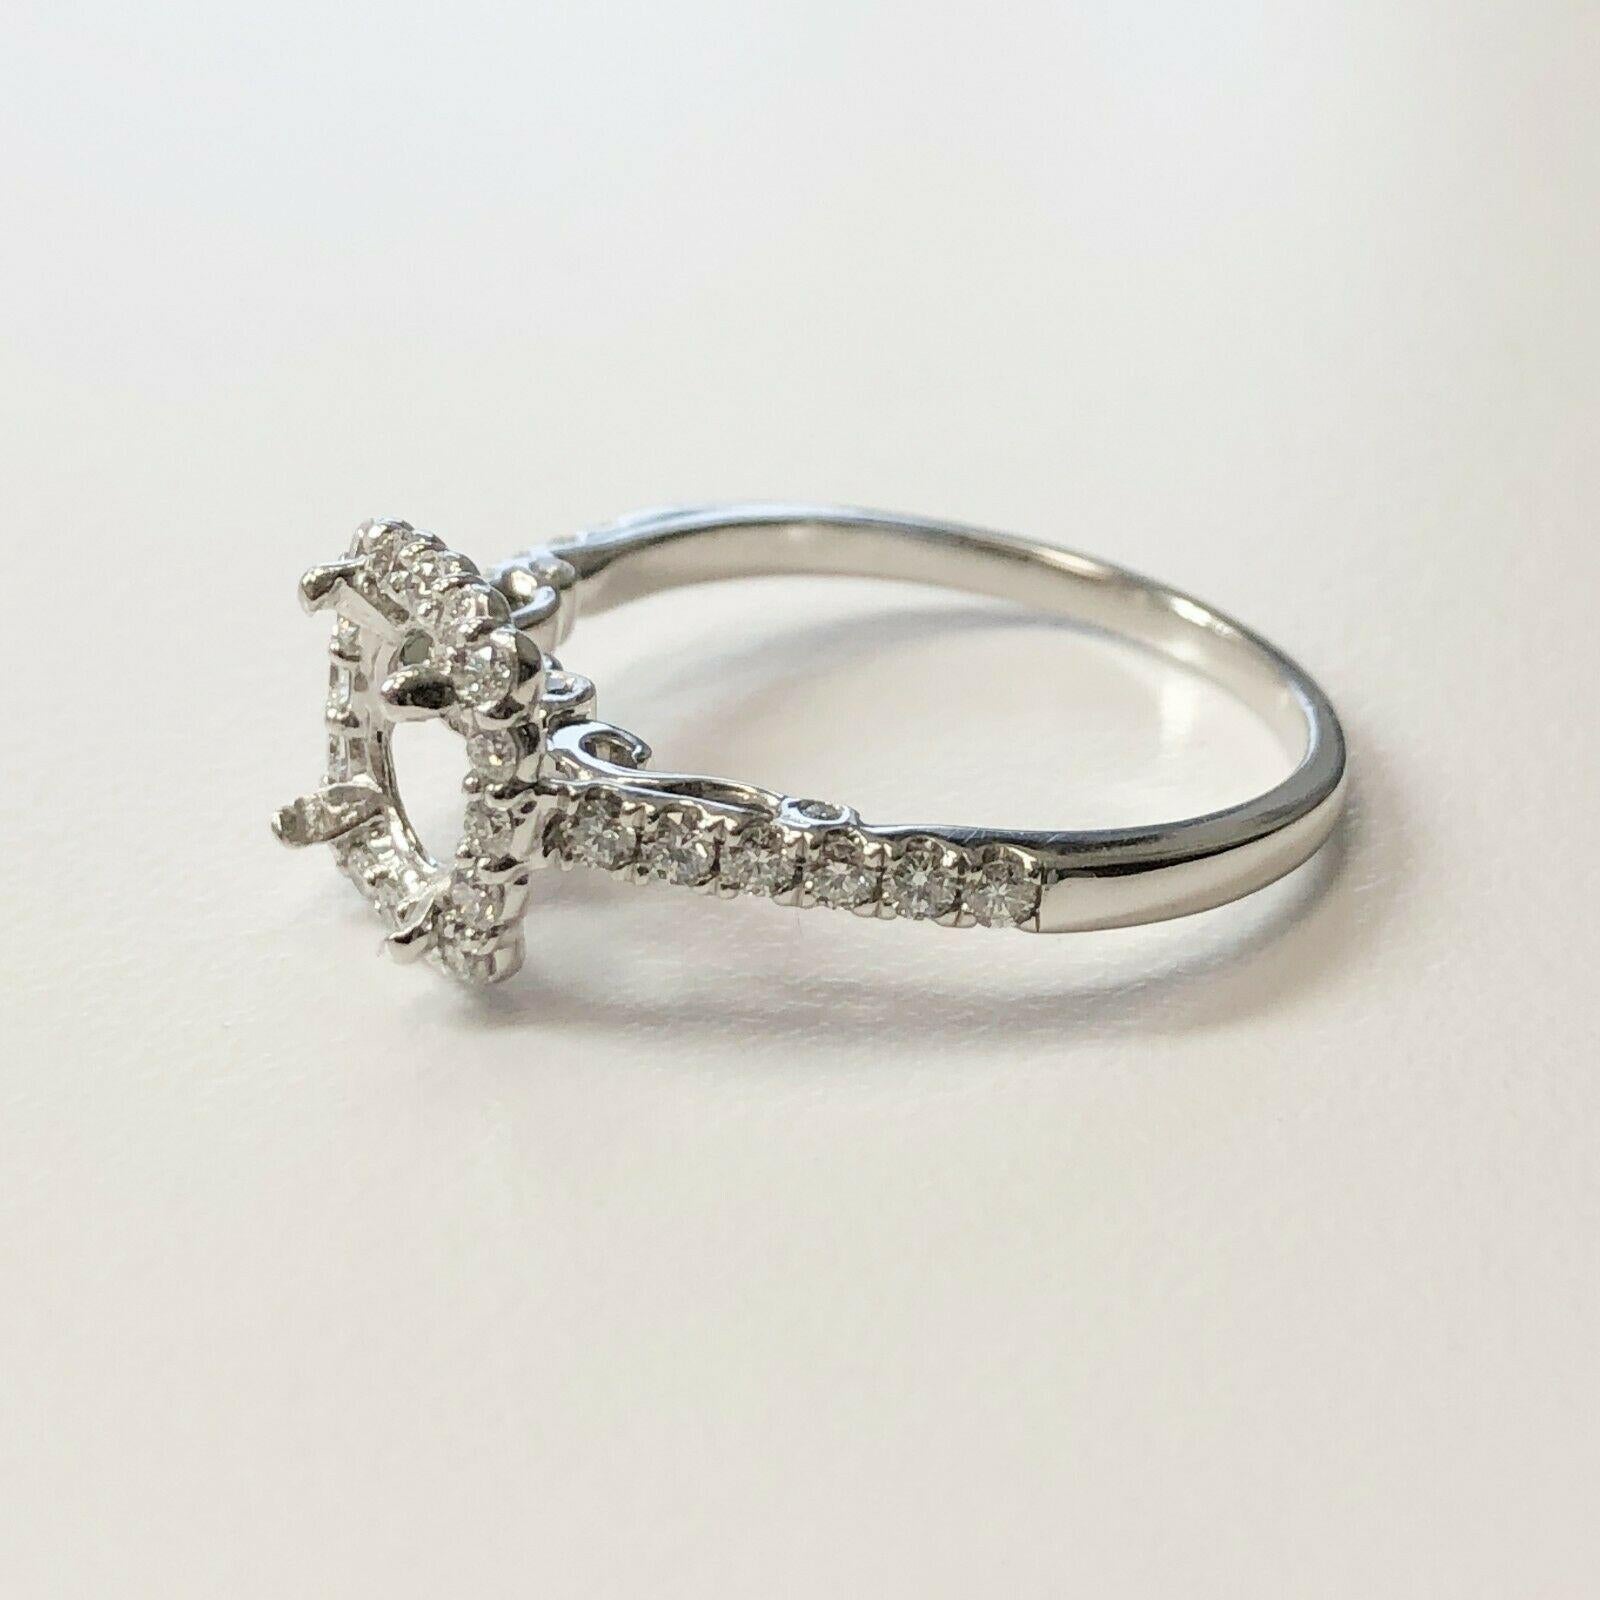 Contemporary 14 Karat White Gold Diamond Halo Ring That Can Fit a 1.50 Carat For Sale